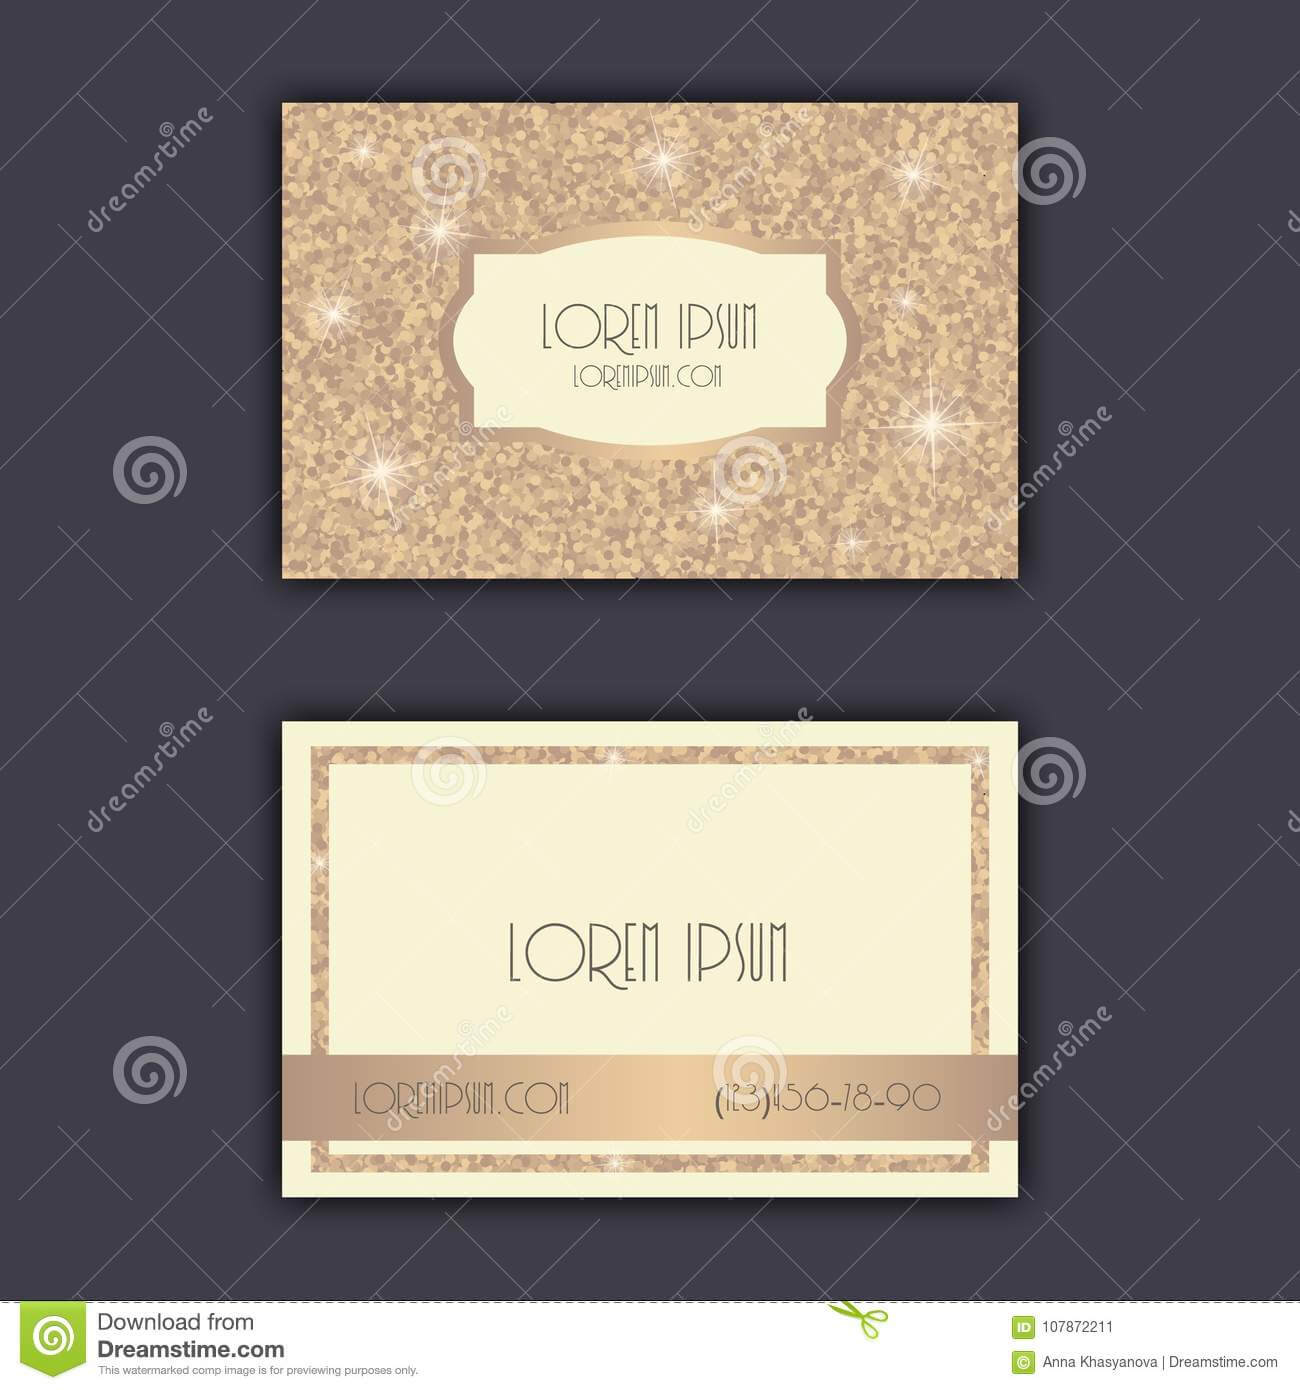 Business Card Templates With Glitter Shining Background With Celebrate It Templates Place Cards